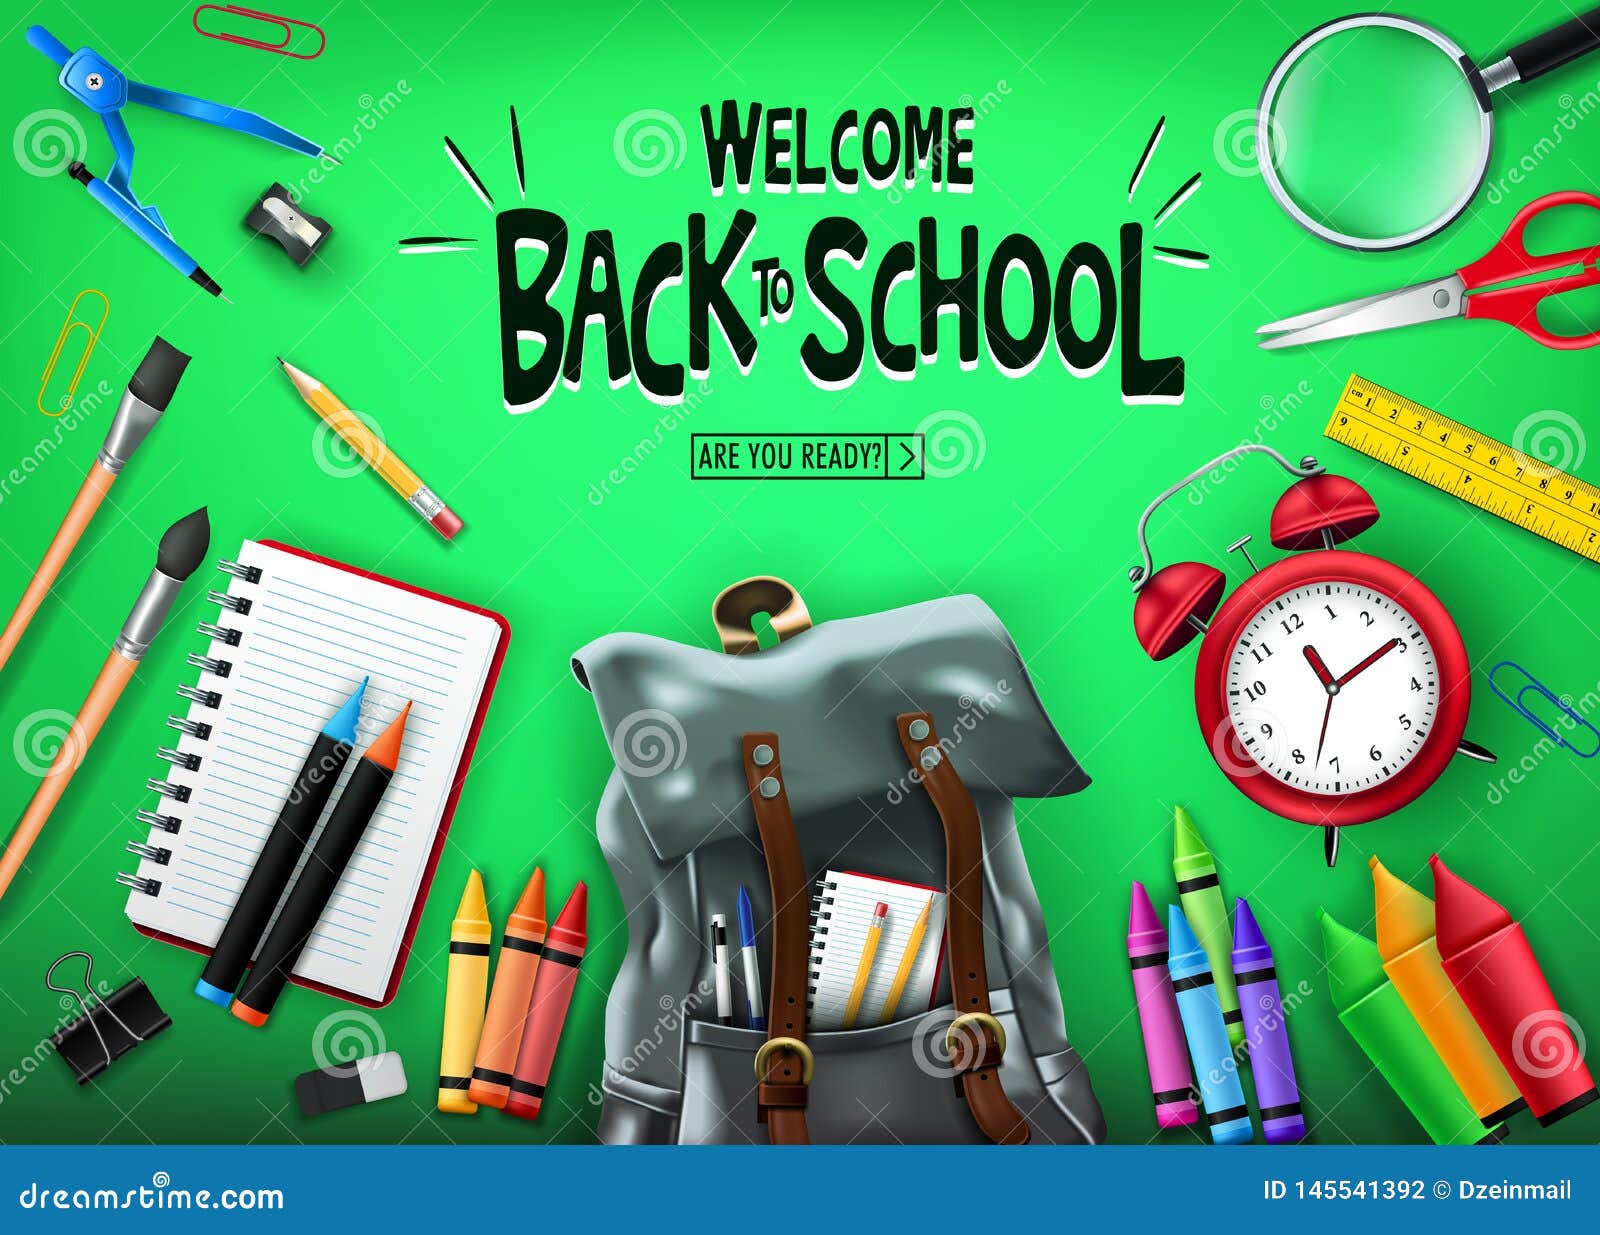 Welcome Back To School In Green Background Banner With Black Backpack And School Supplies Stock Vector Illustration Of Lesson Child